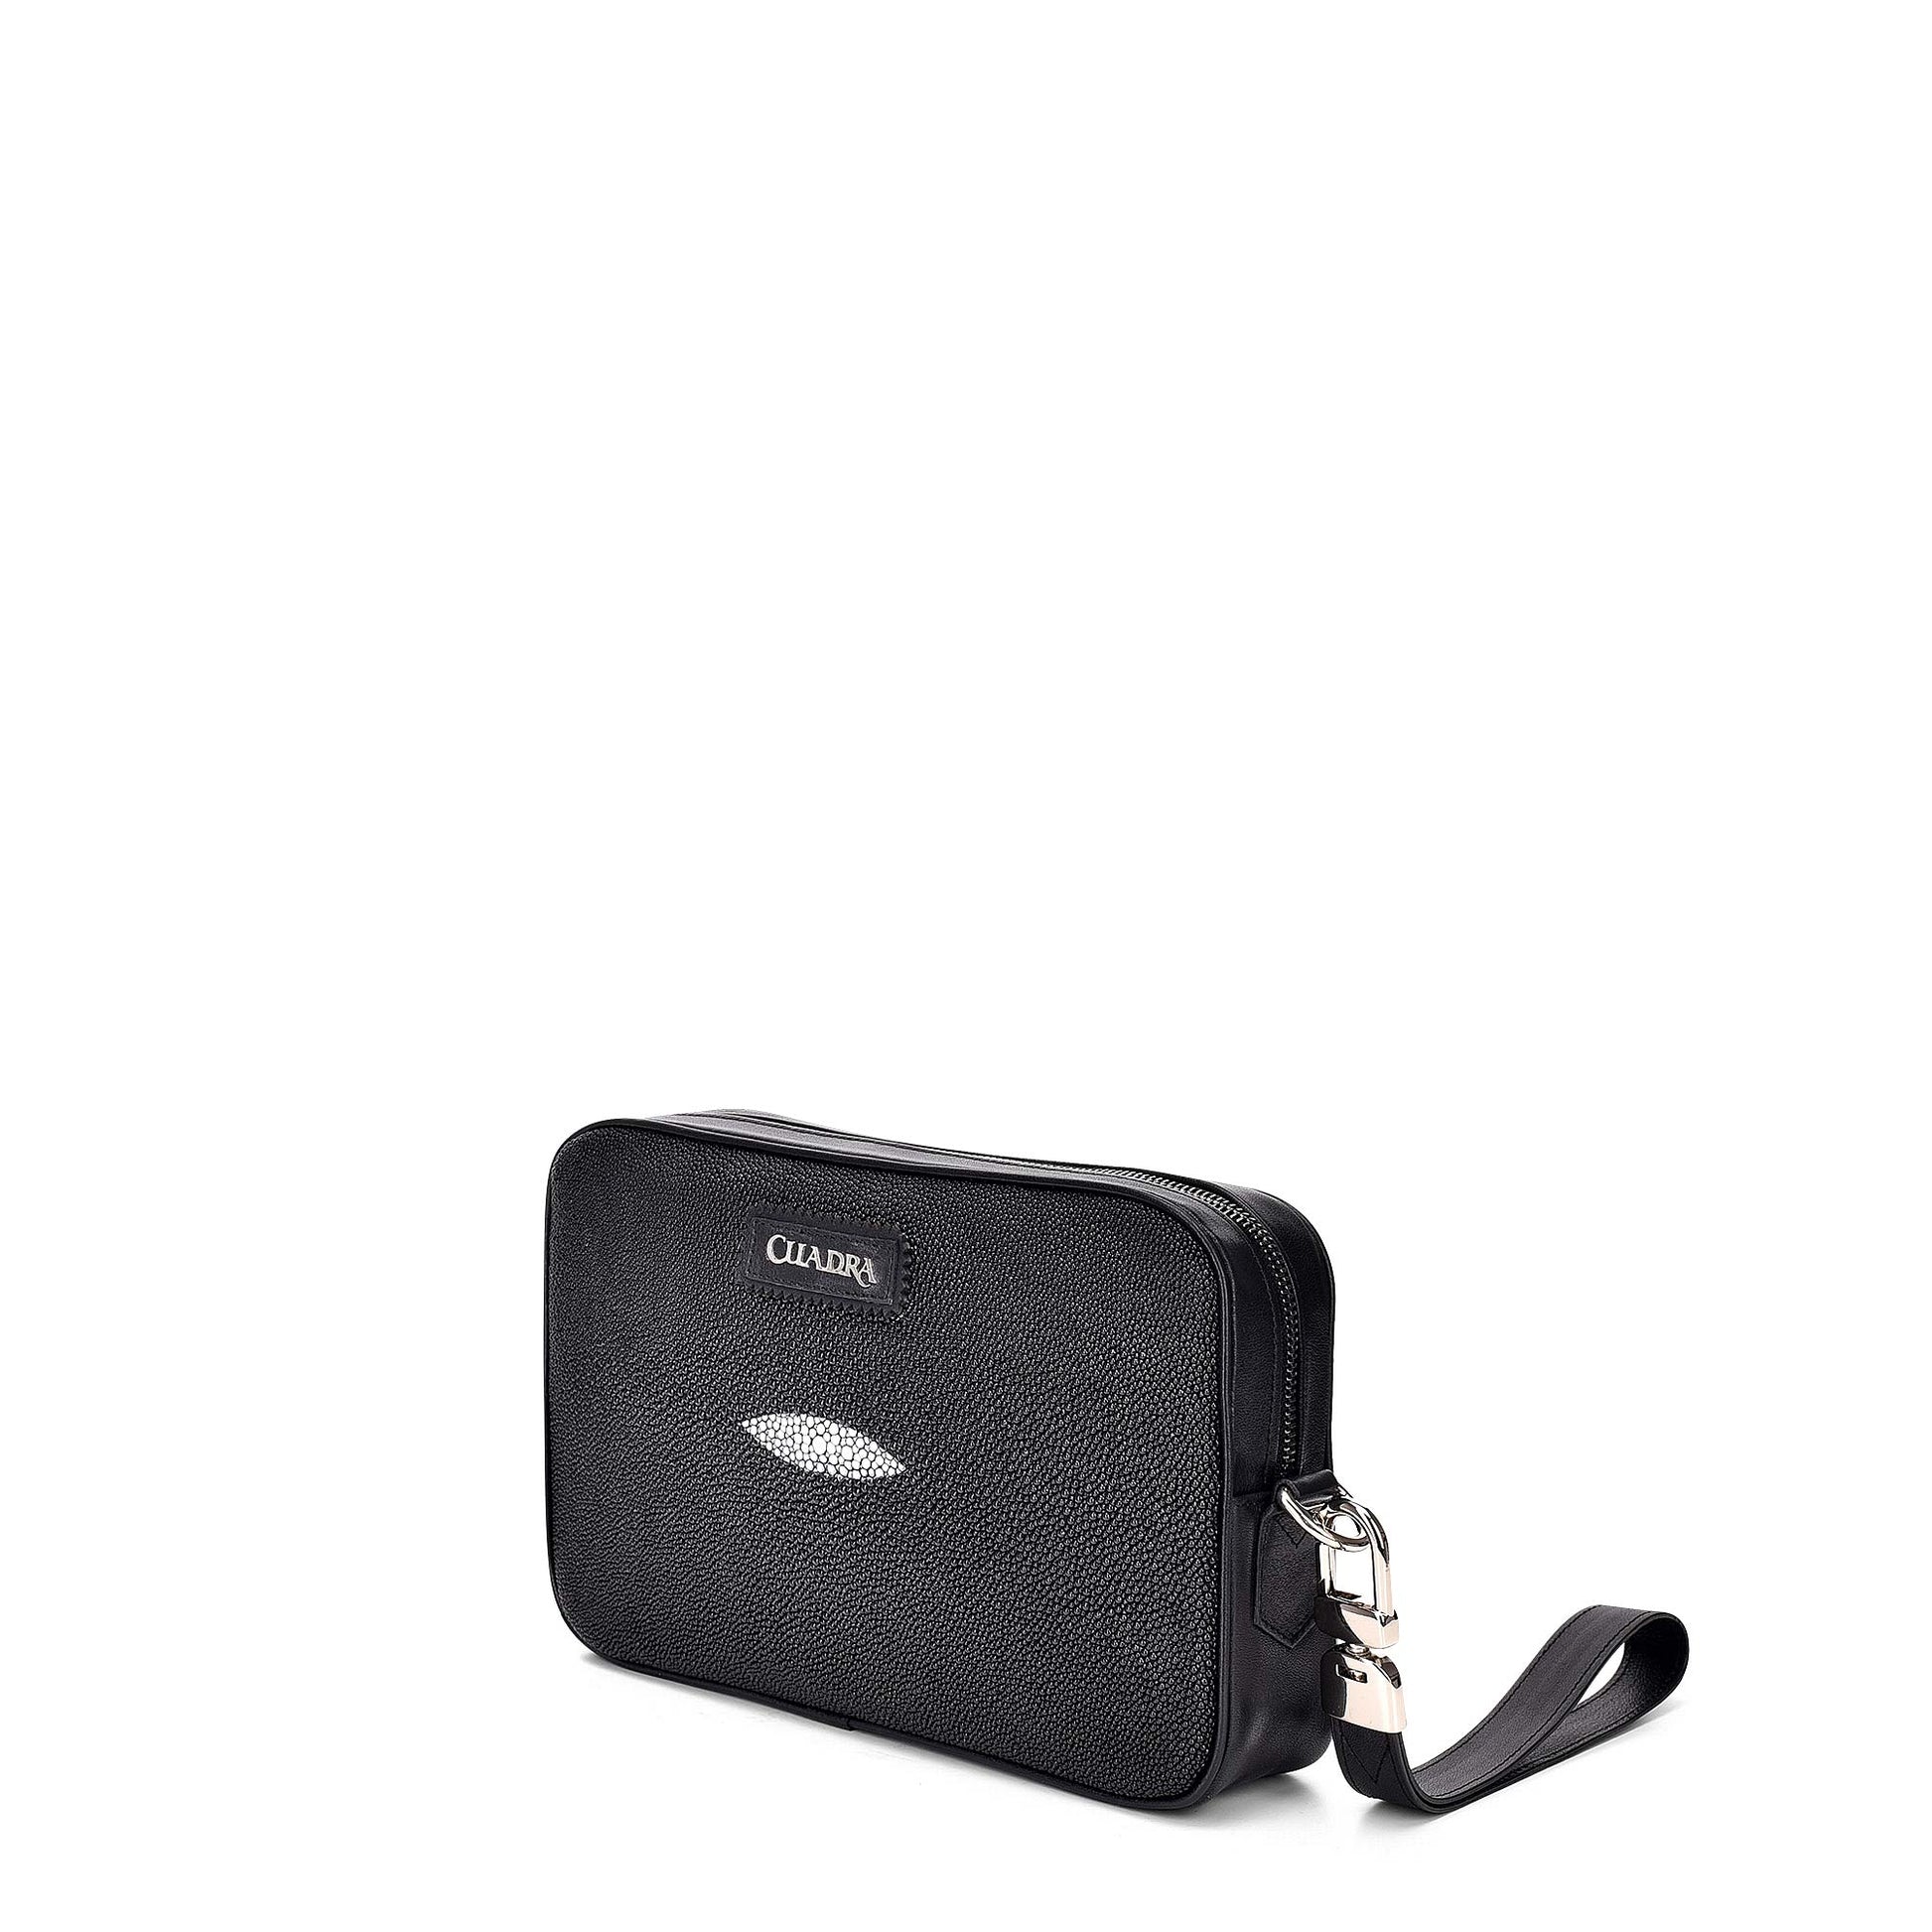 Black leather document bag, stingray leather and bovine leather with removable  strap